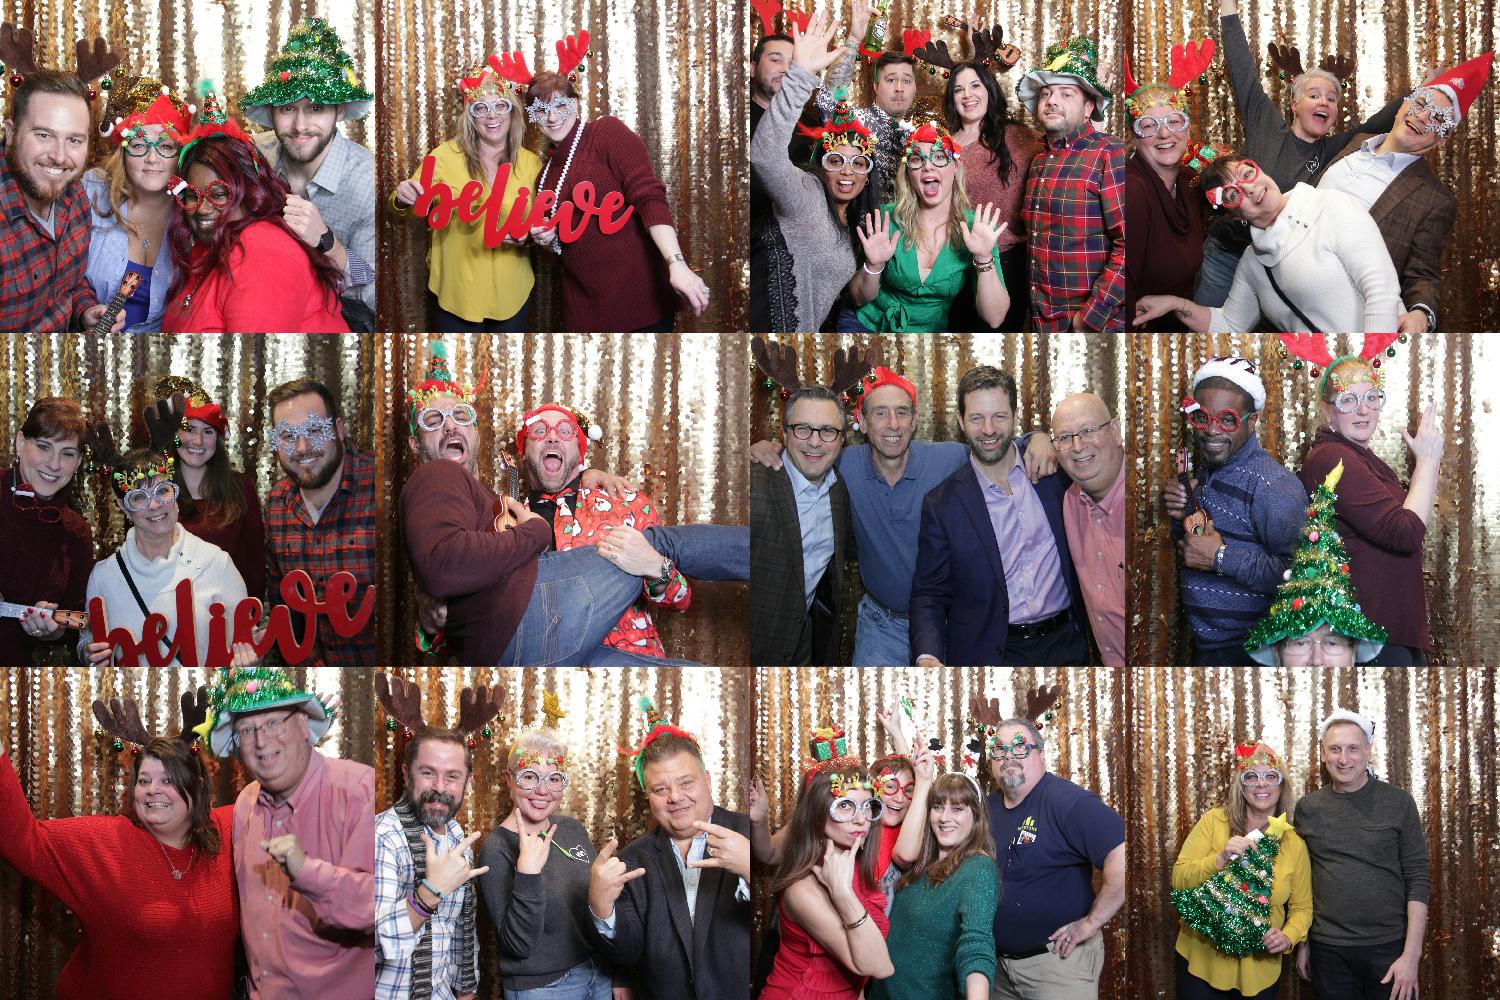 Holiday Party Photo Booth Fun